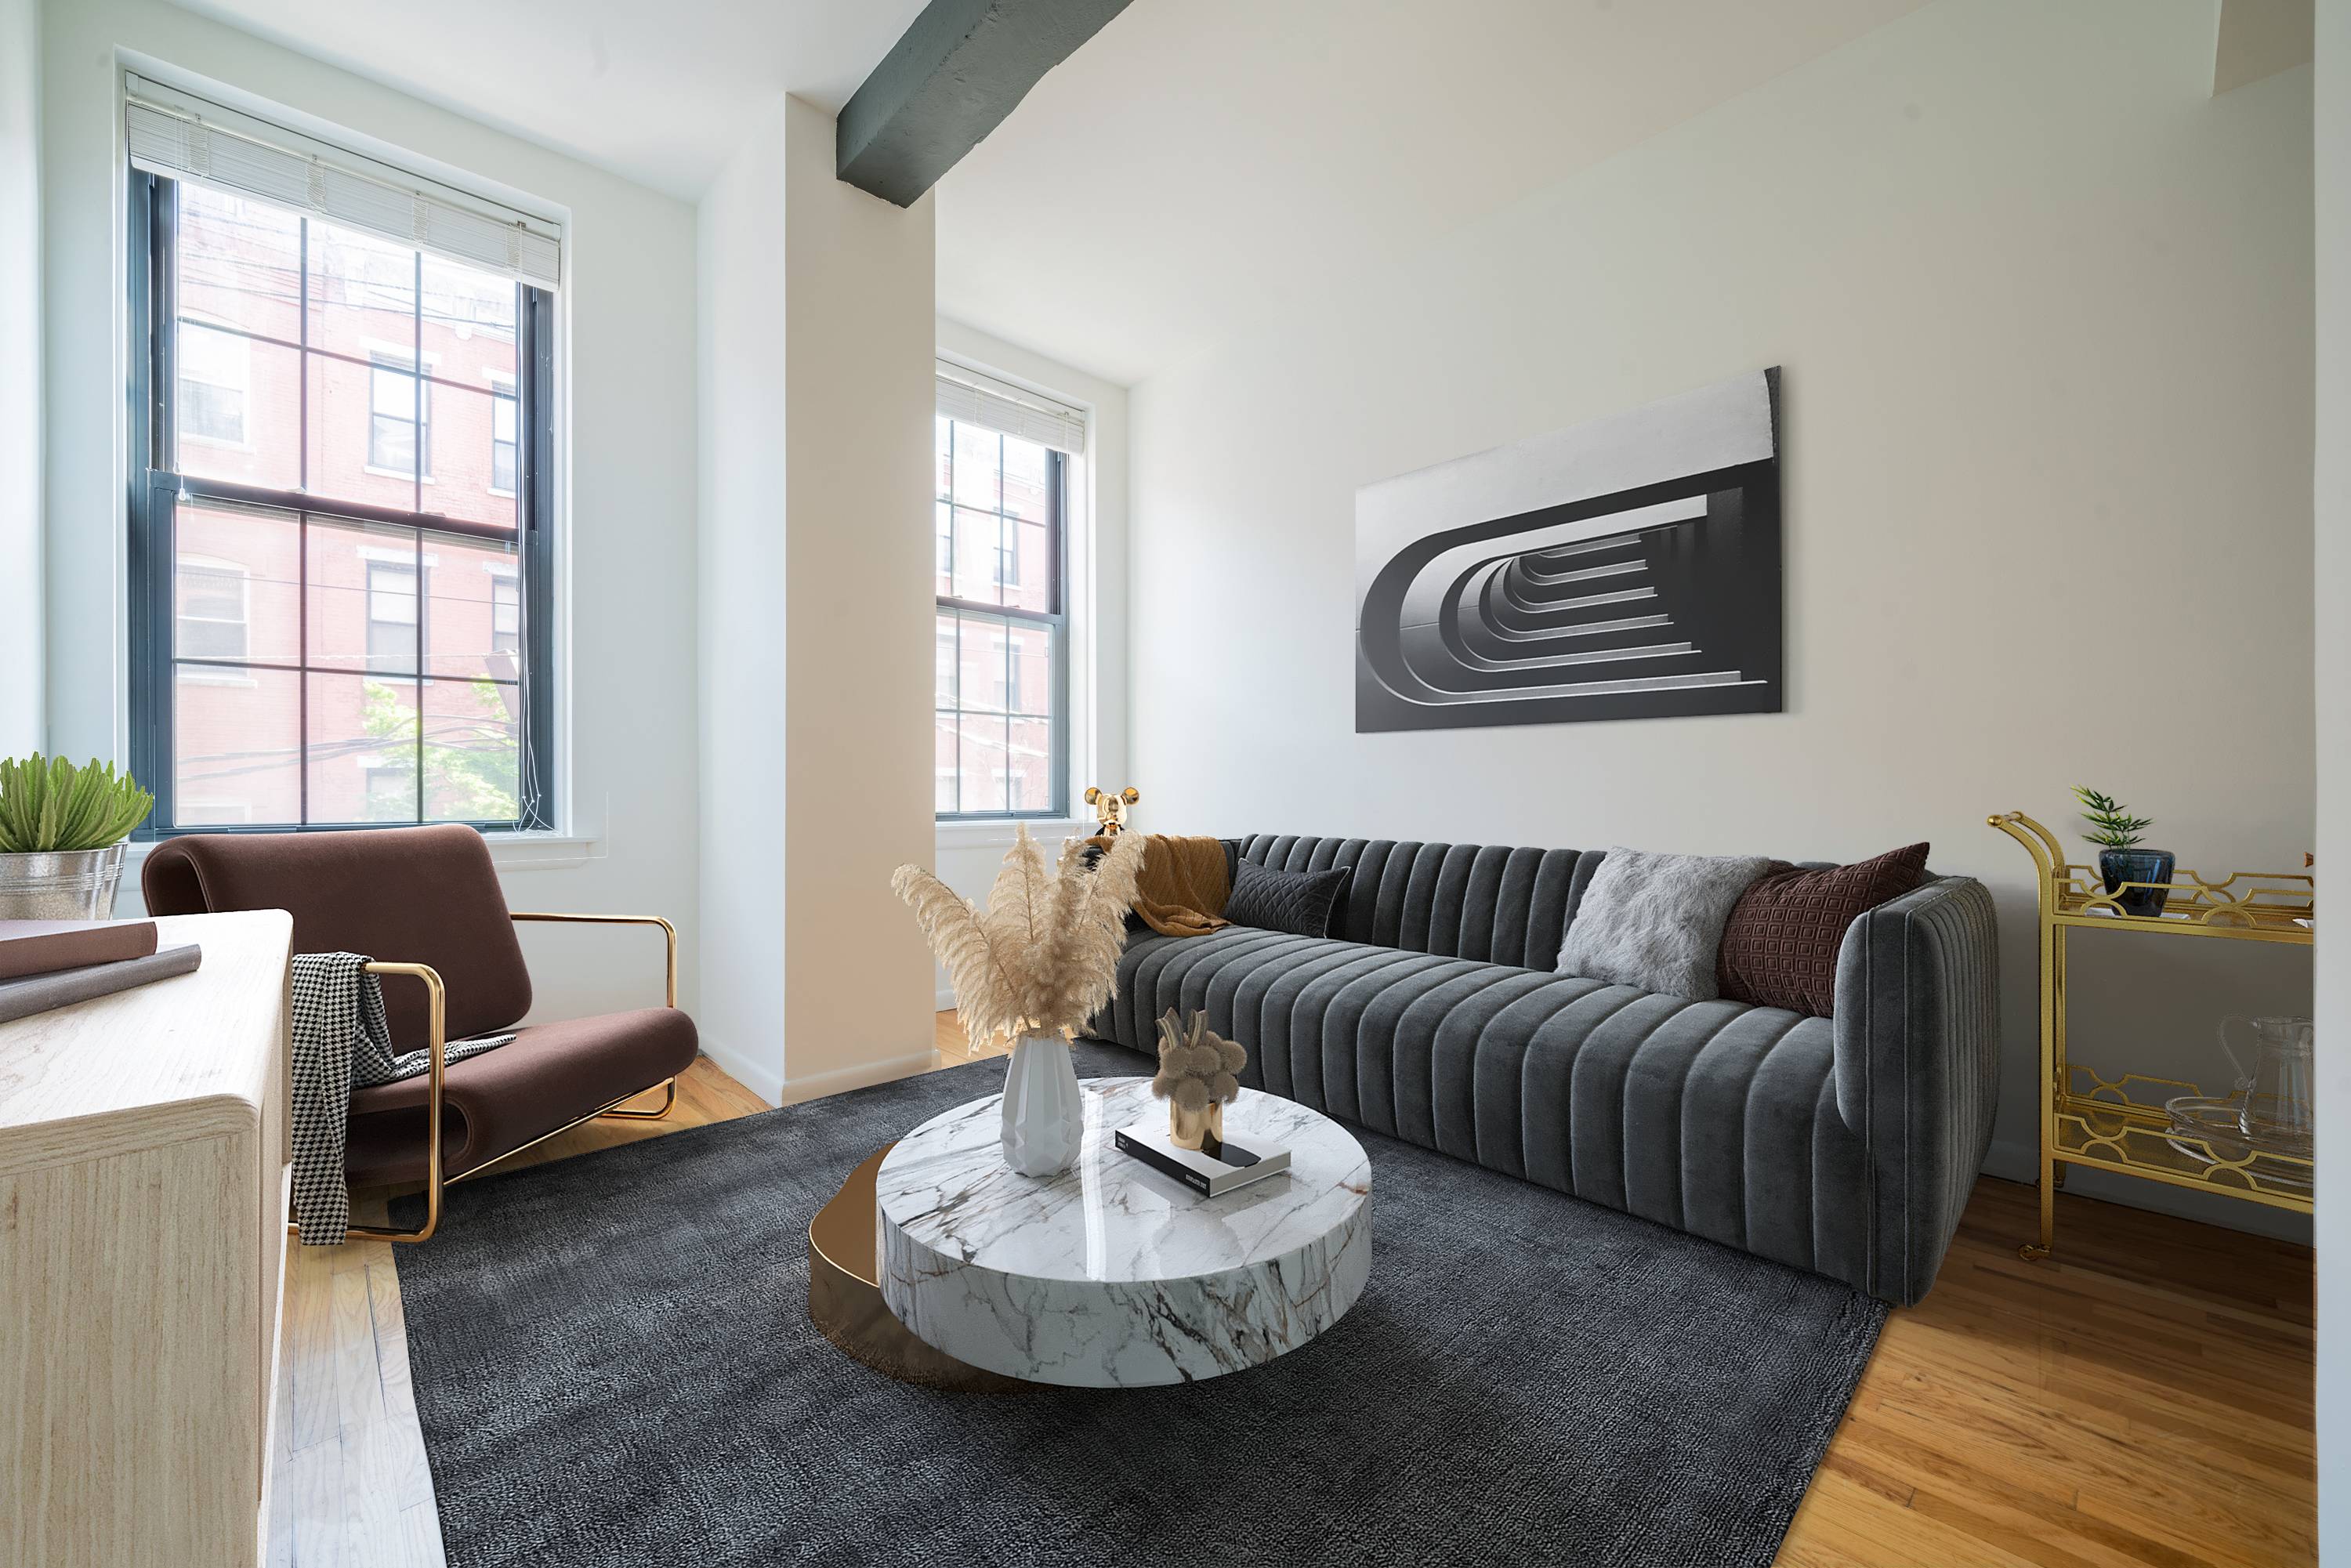 Soho-Style Lofts located in the heart of Downtown Hoboken!  Studio - 3 Bedroom Homes!  No Broker Fees!